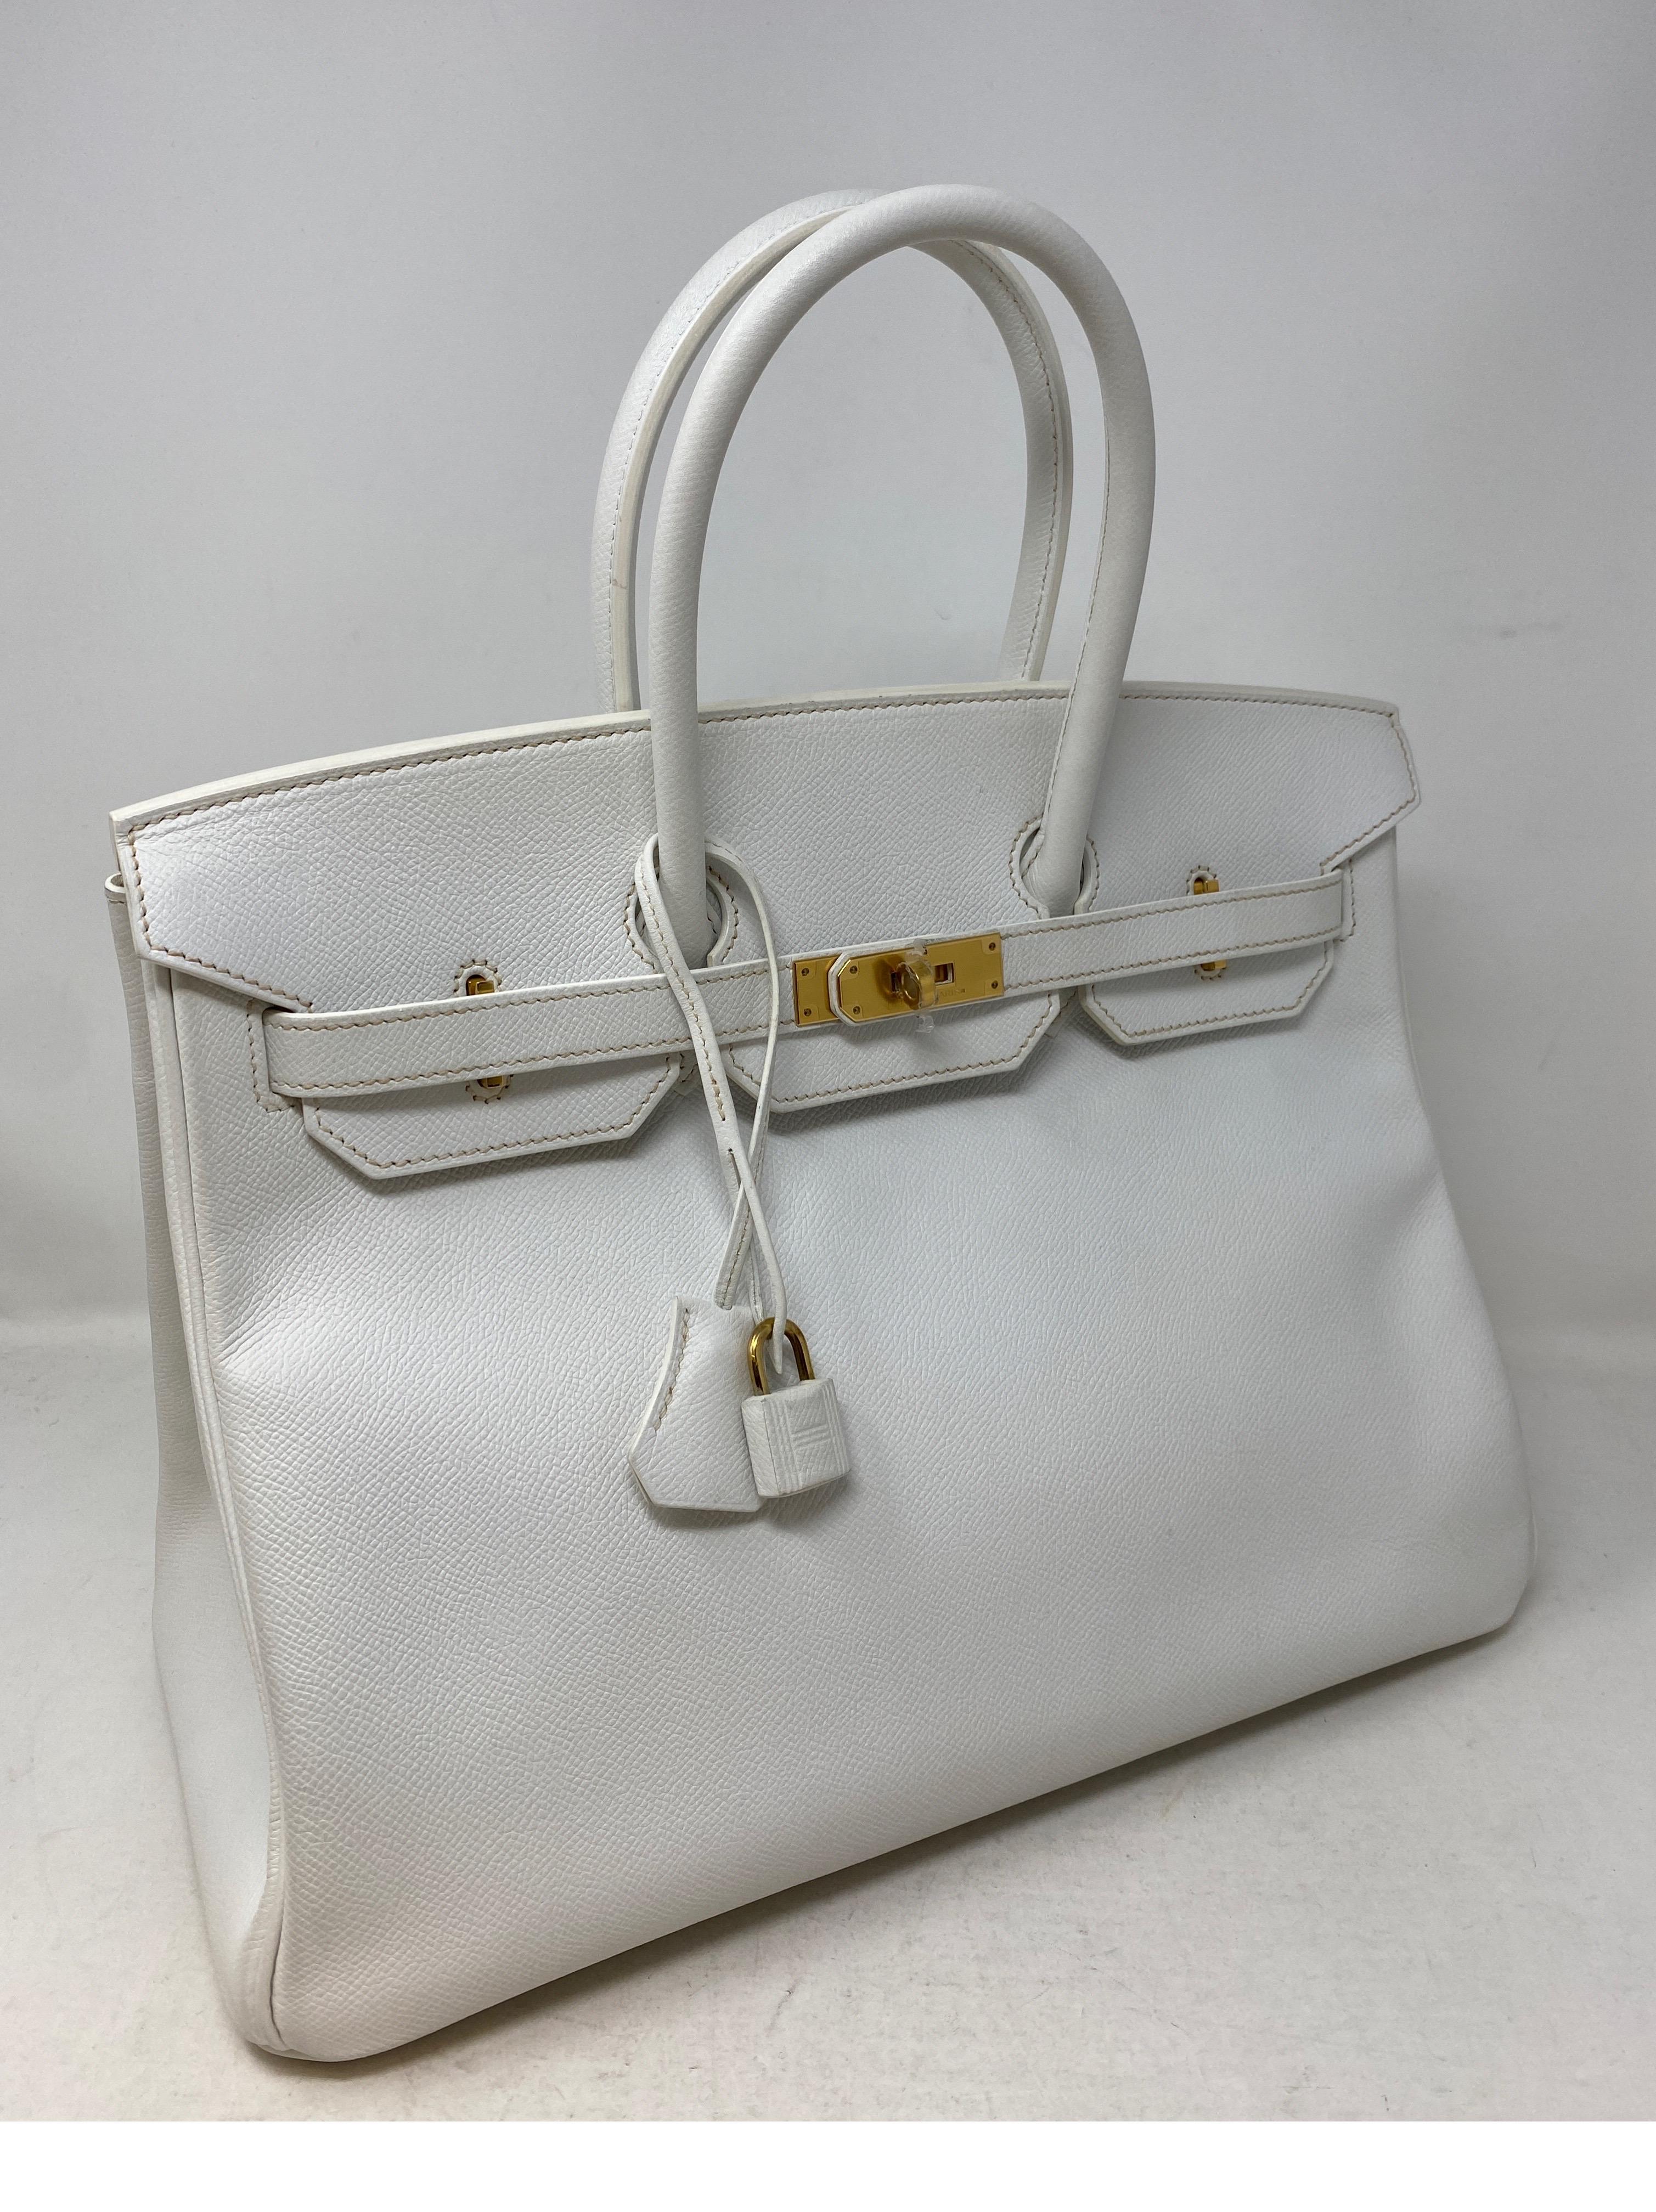 Hermes White Birkin 35 Bag. Rare white Birkin with gold hardware. Sought after white in good condition. Plastic still on hardware. Includes clochette, lock, keys, and dust cover. Guaranteed authentic. 